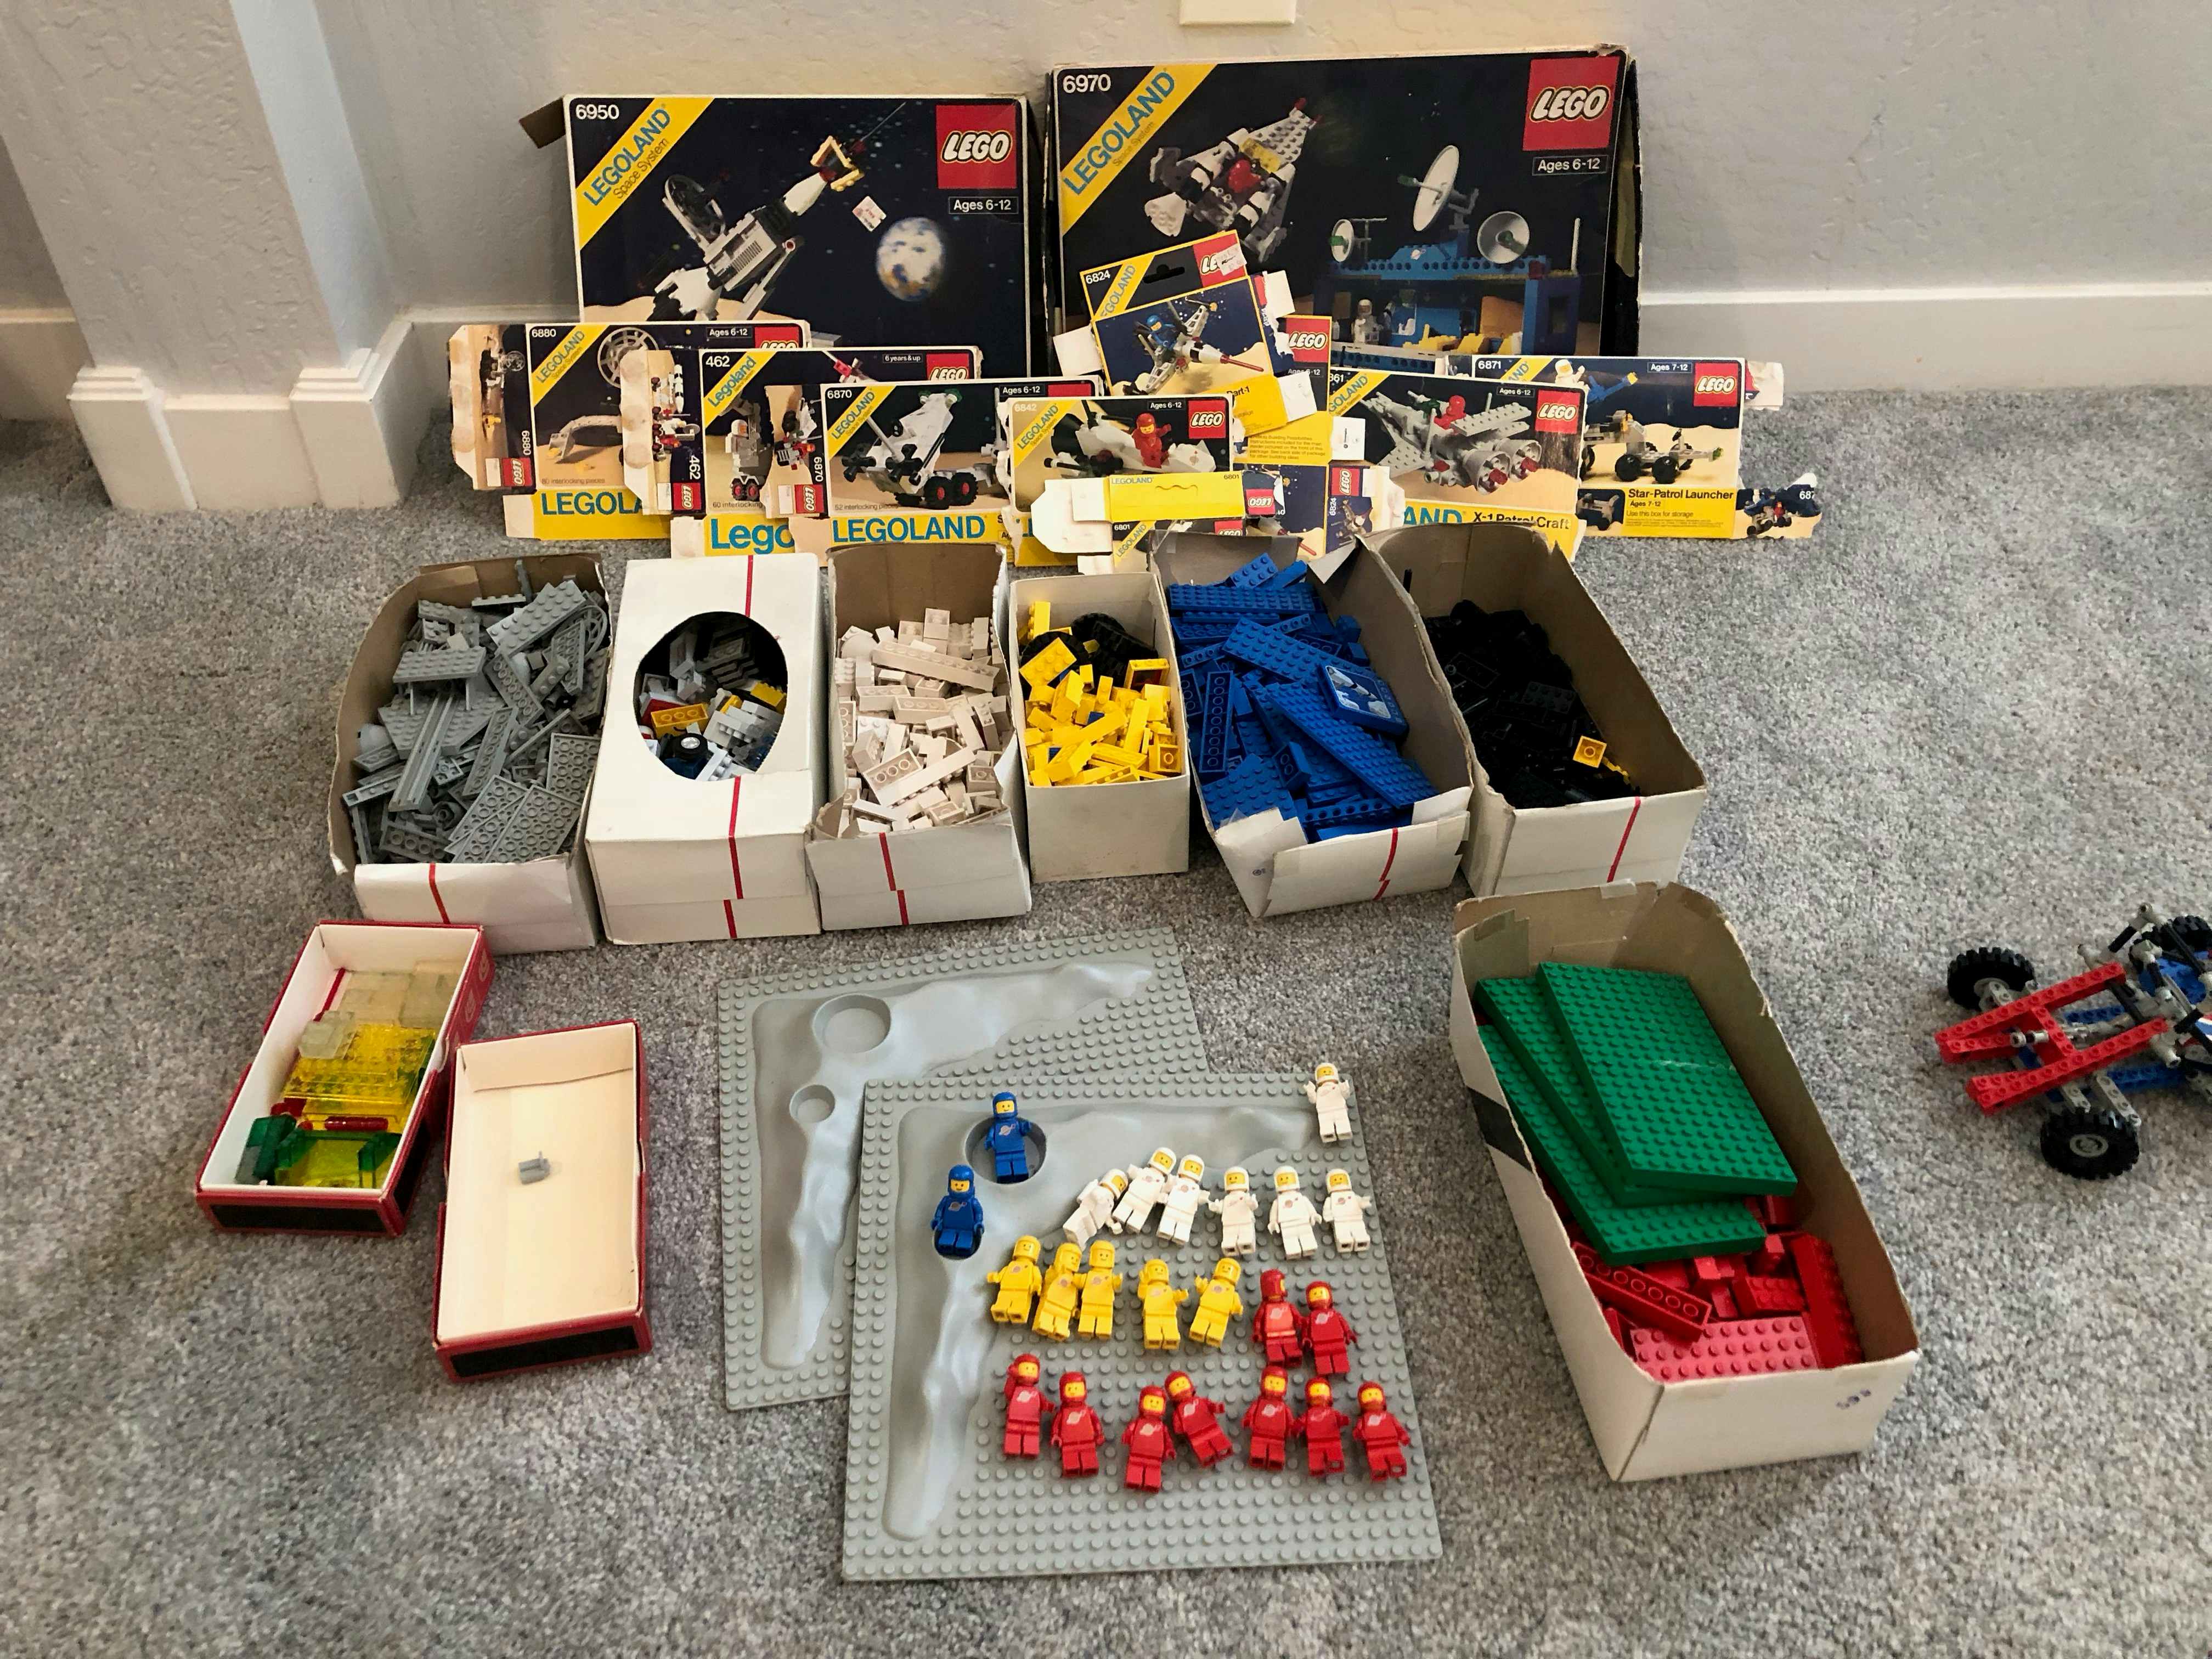 lego sets laid out on the floor